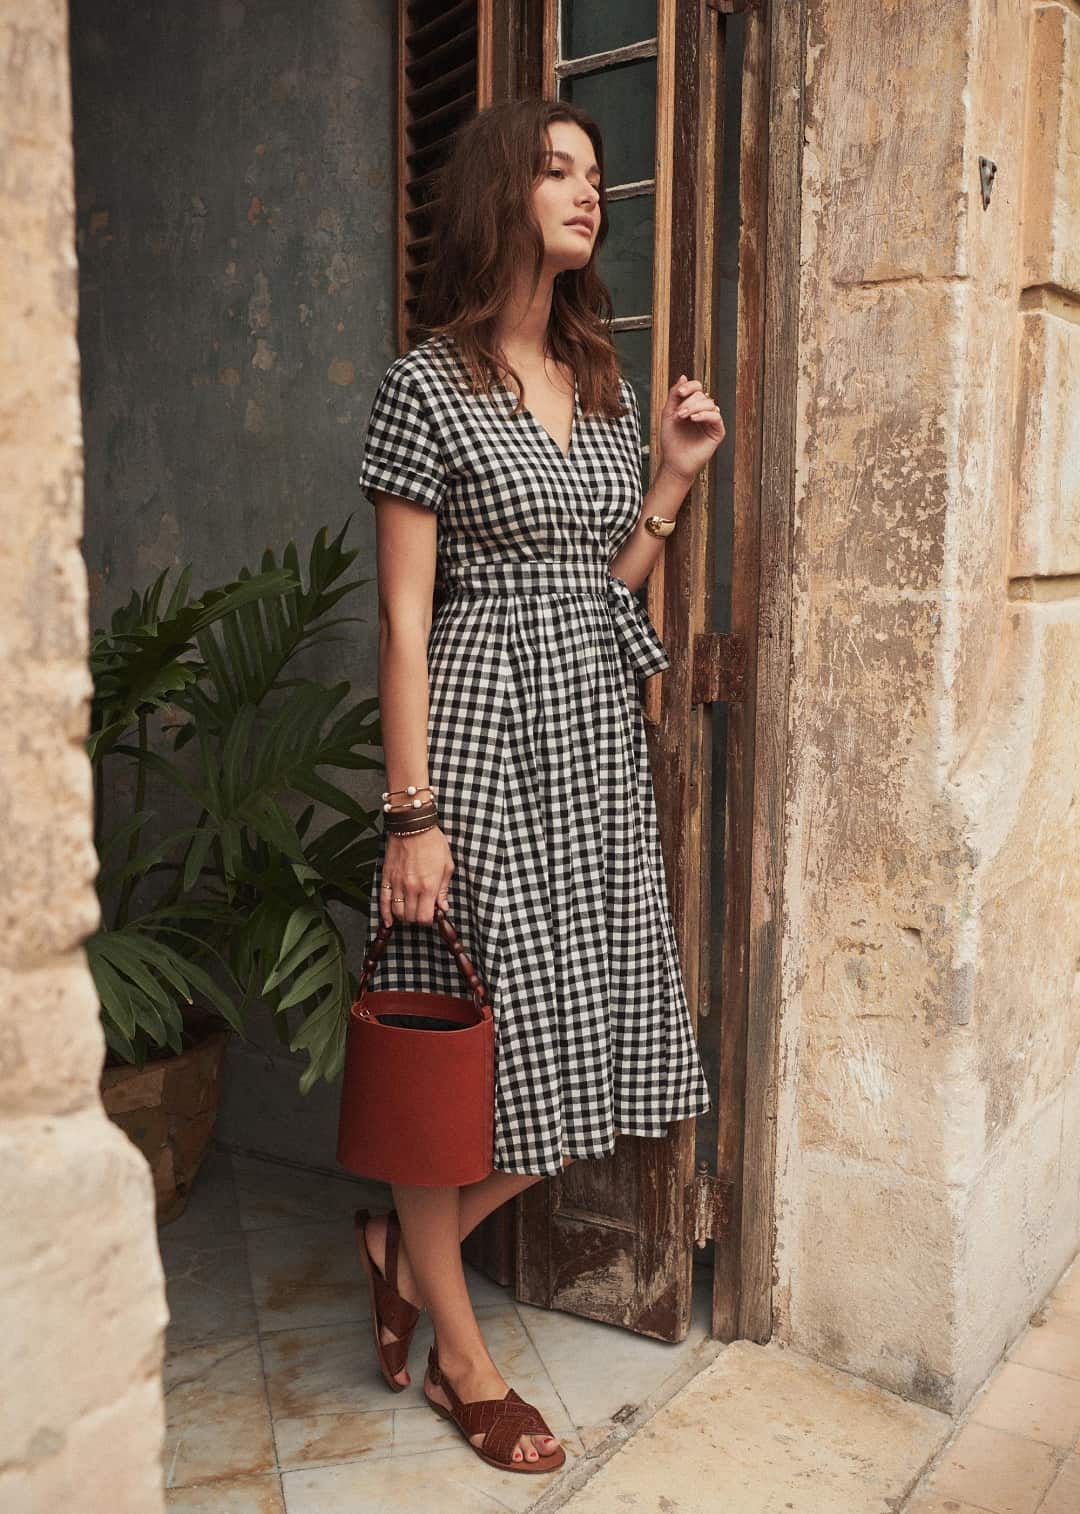 Young woman in a black and white gingham wrap dress poses in an open doorway.